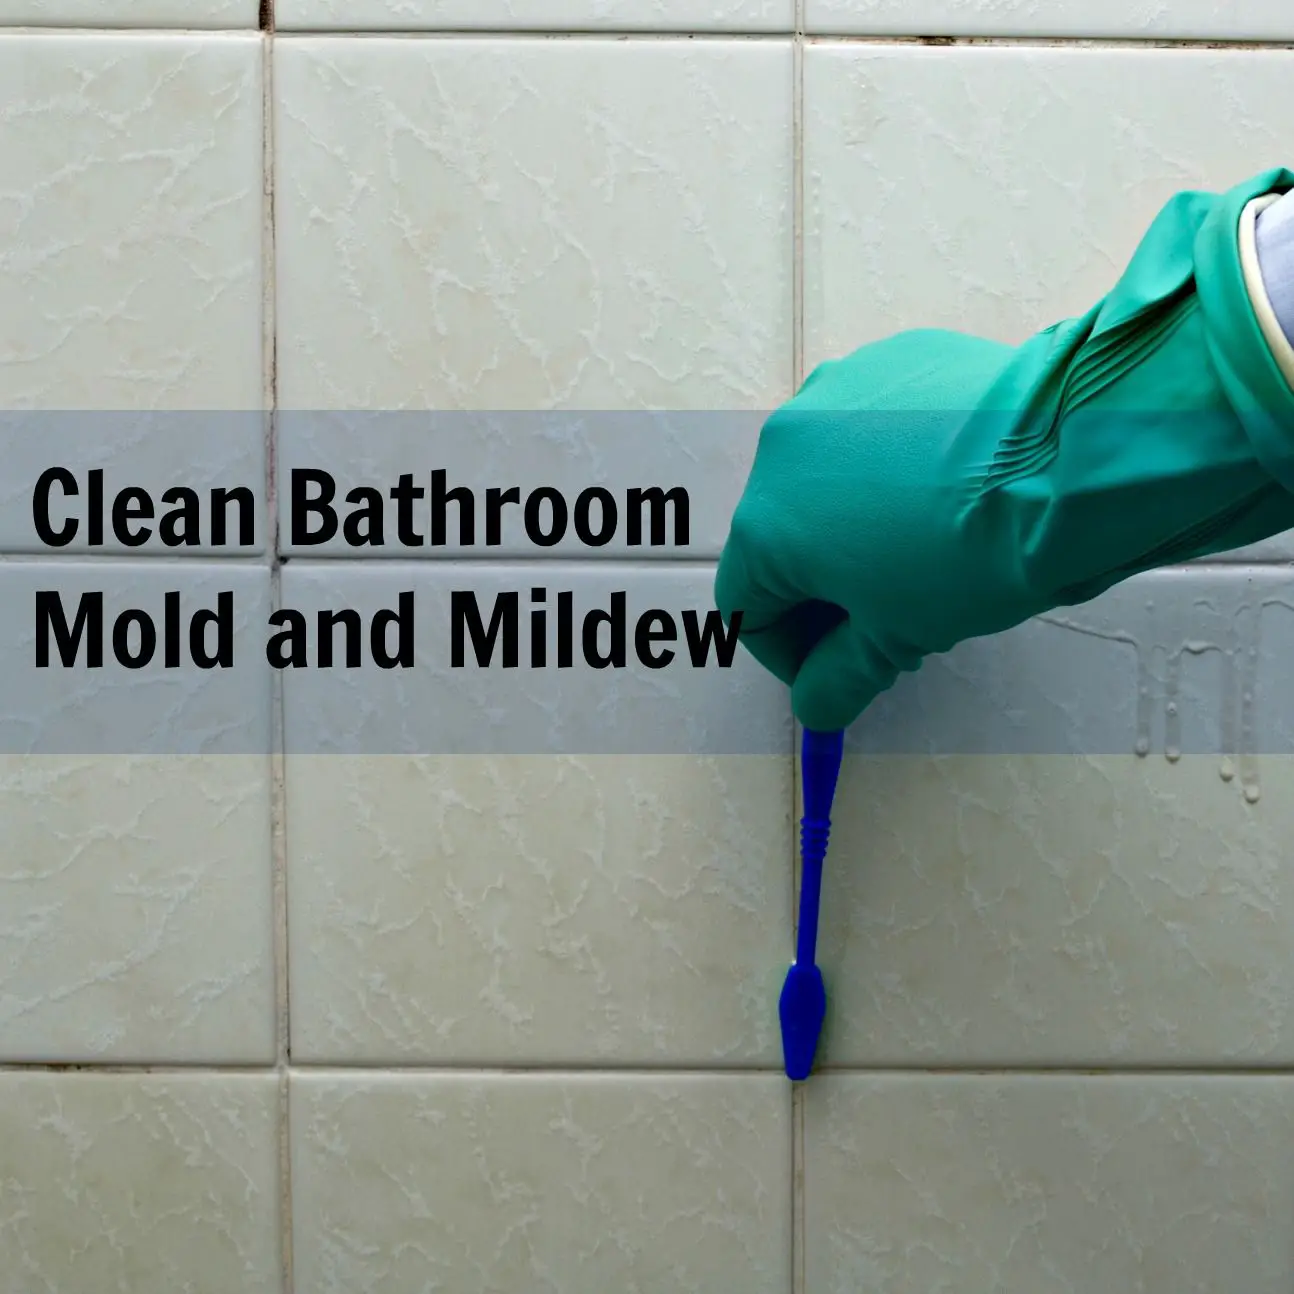 Clean Bathroom Mold and Mildew